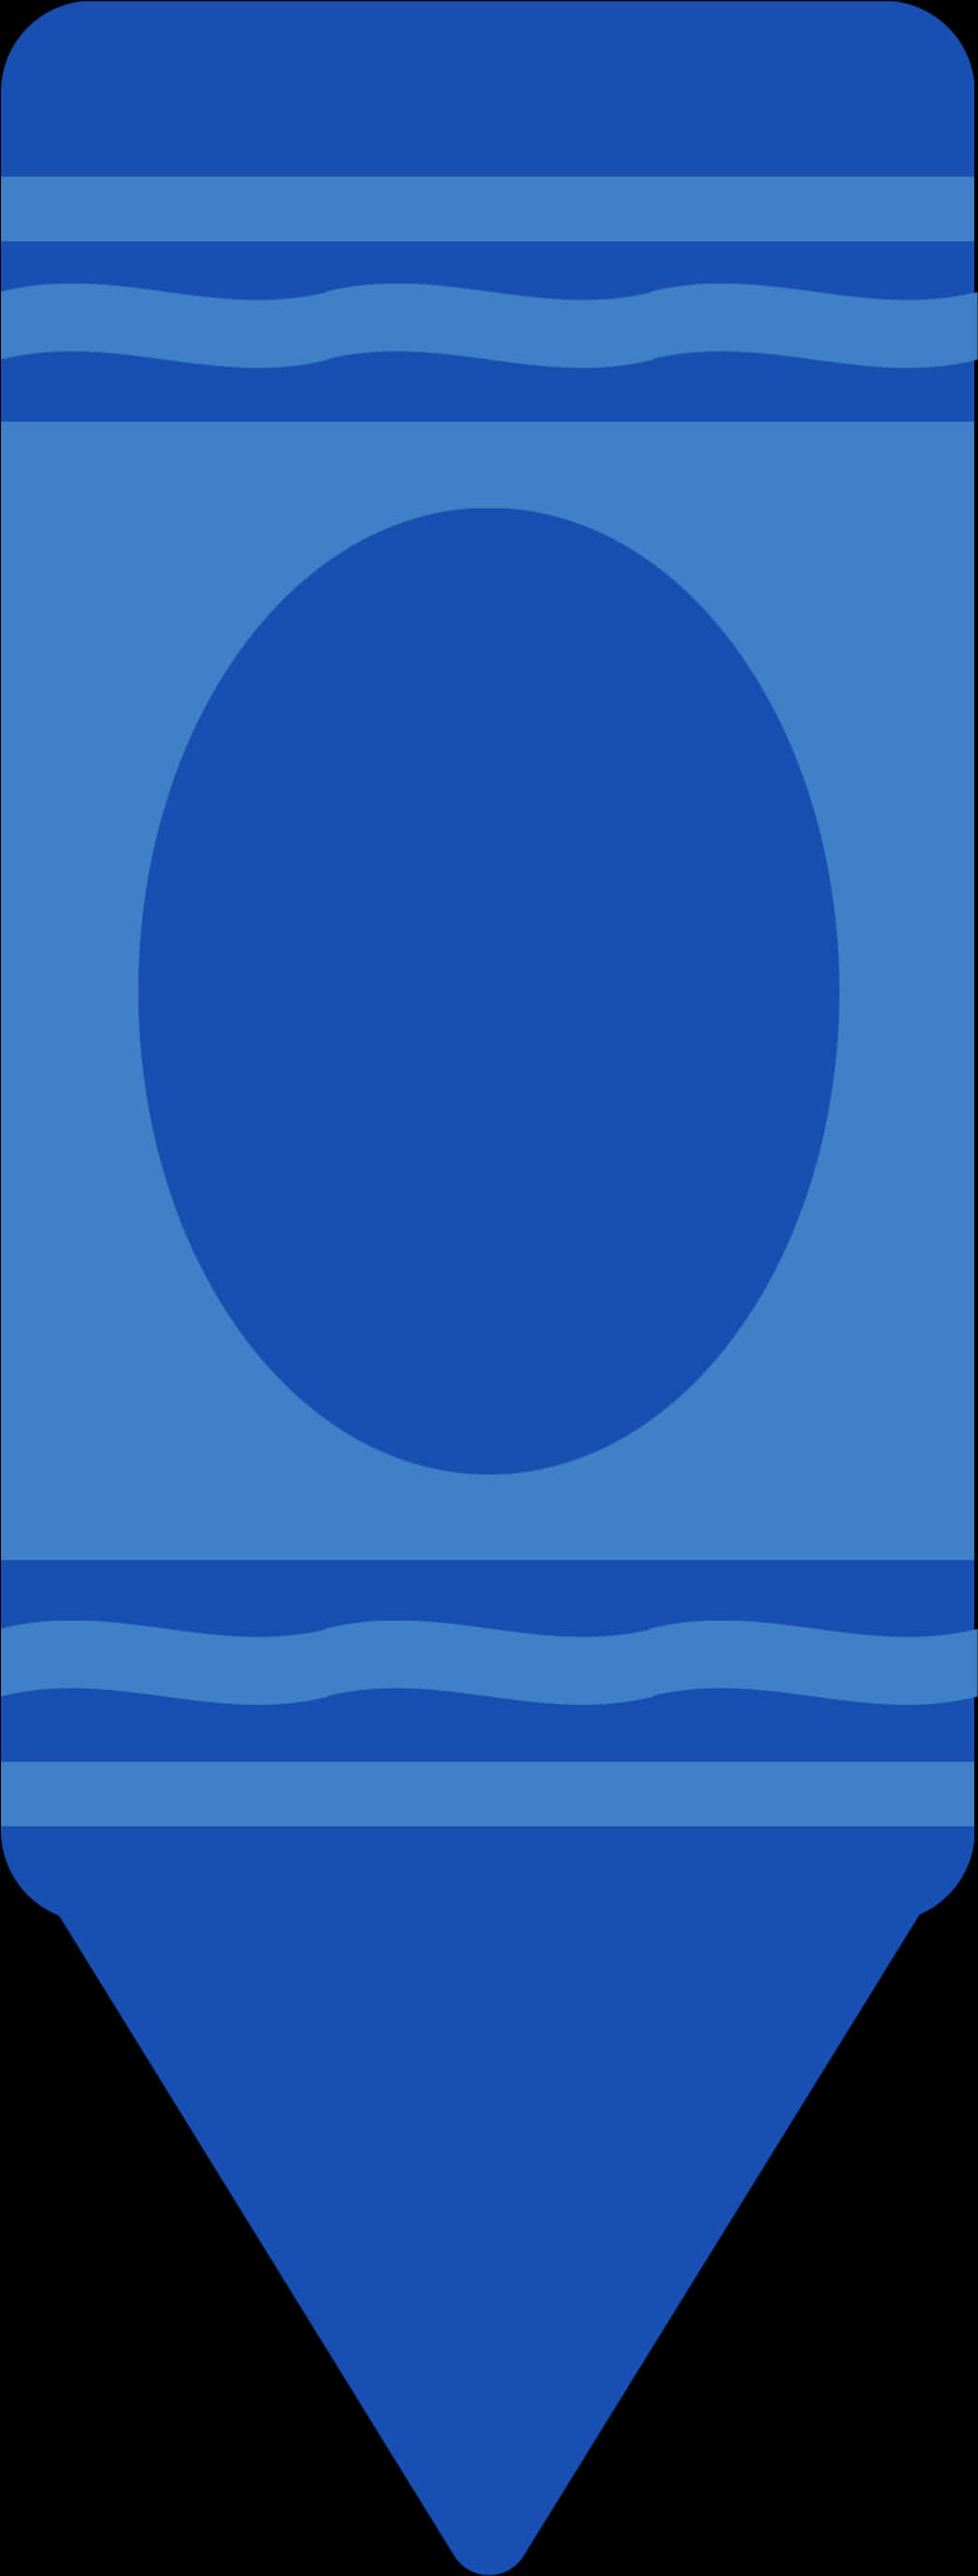 A Blue And White Background With A Circle